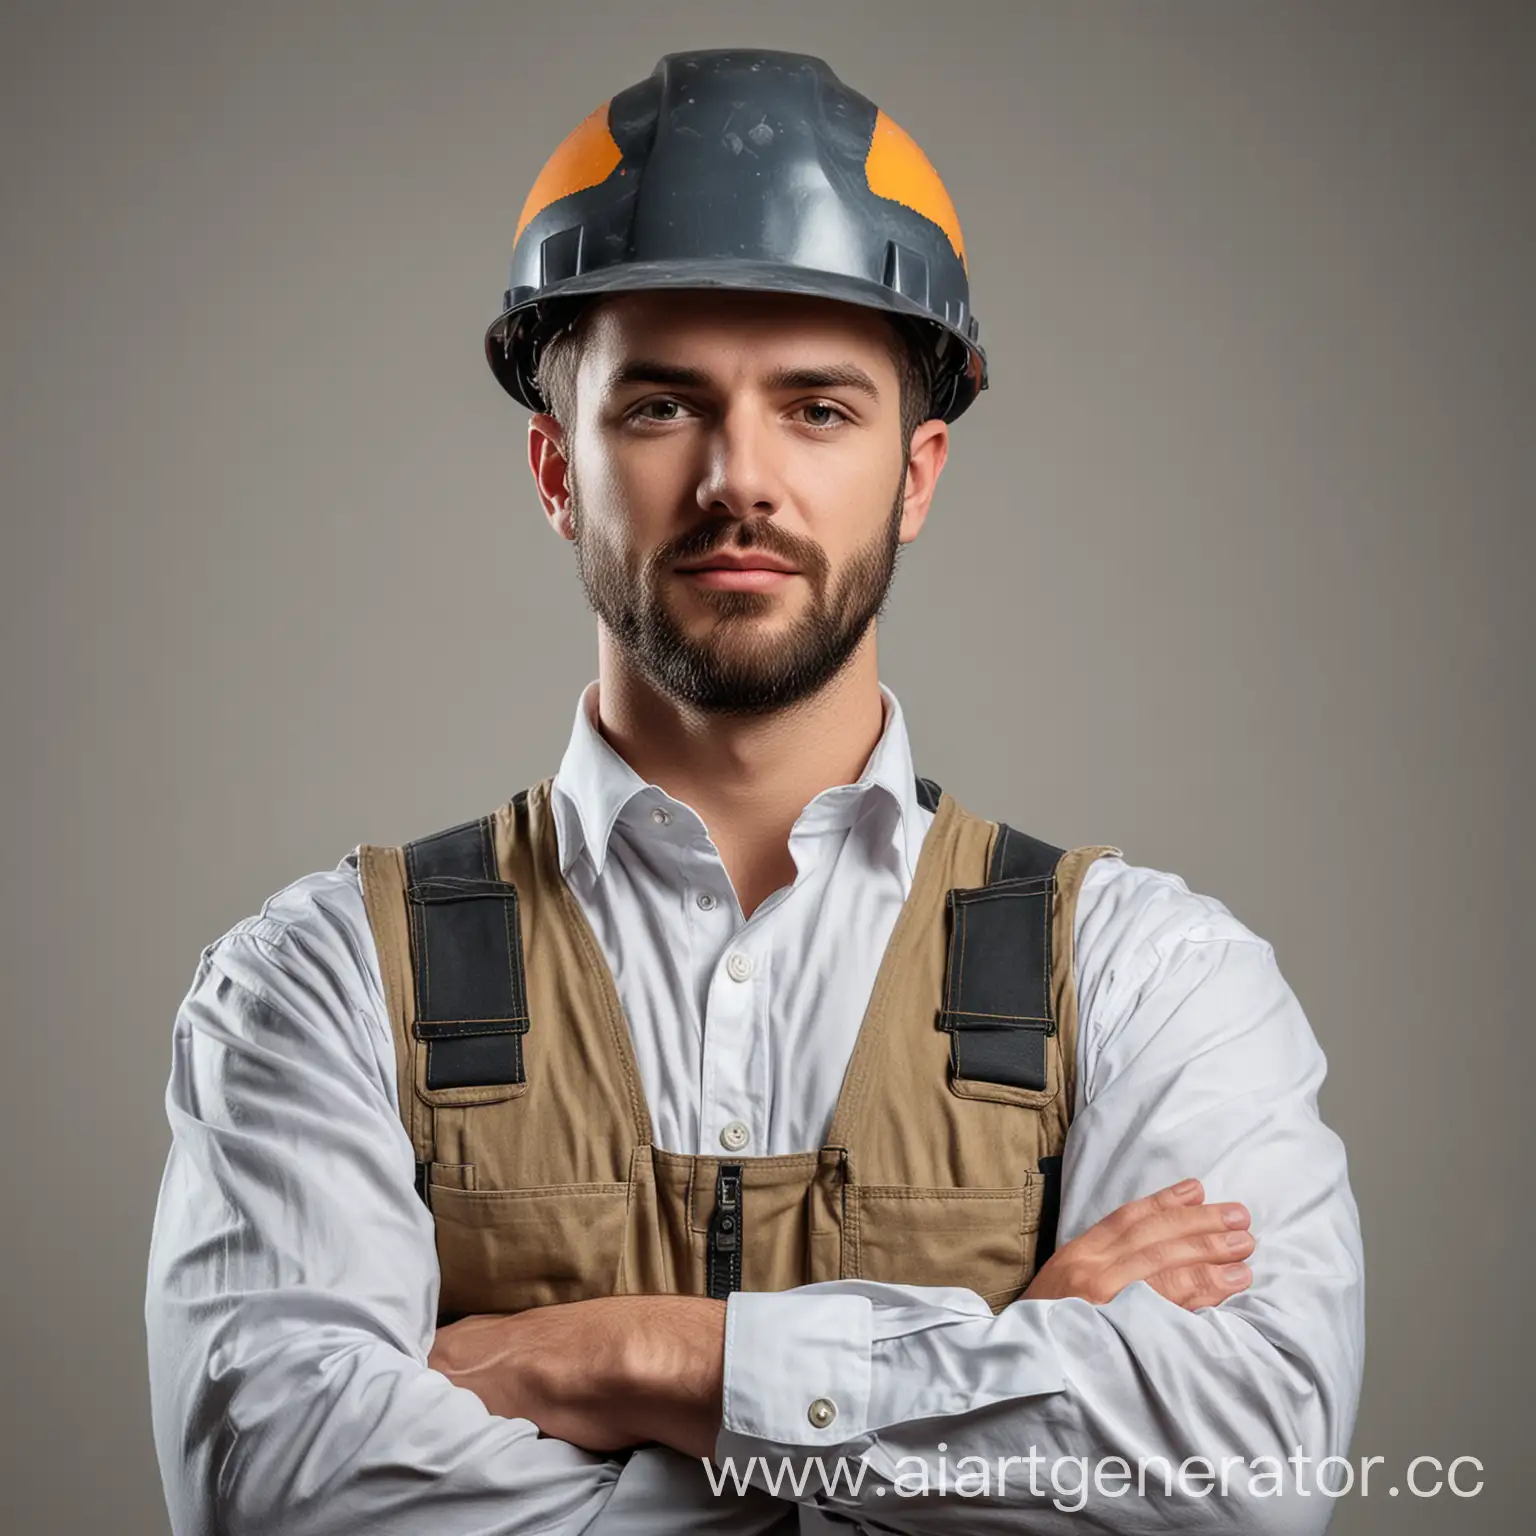 Skilled-Builder-in-Uniform-Constructing-Structure